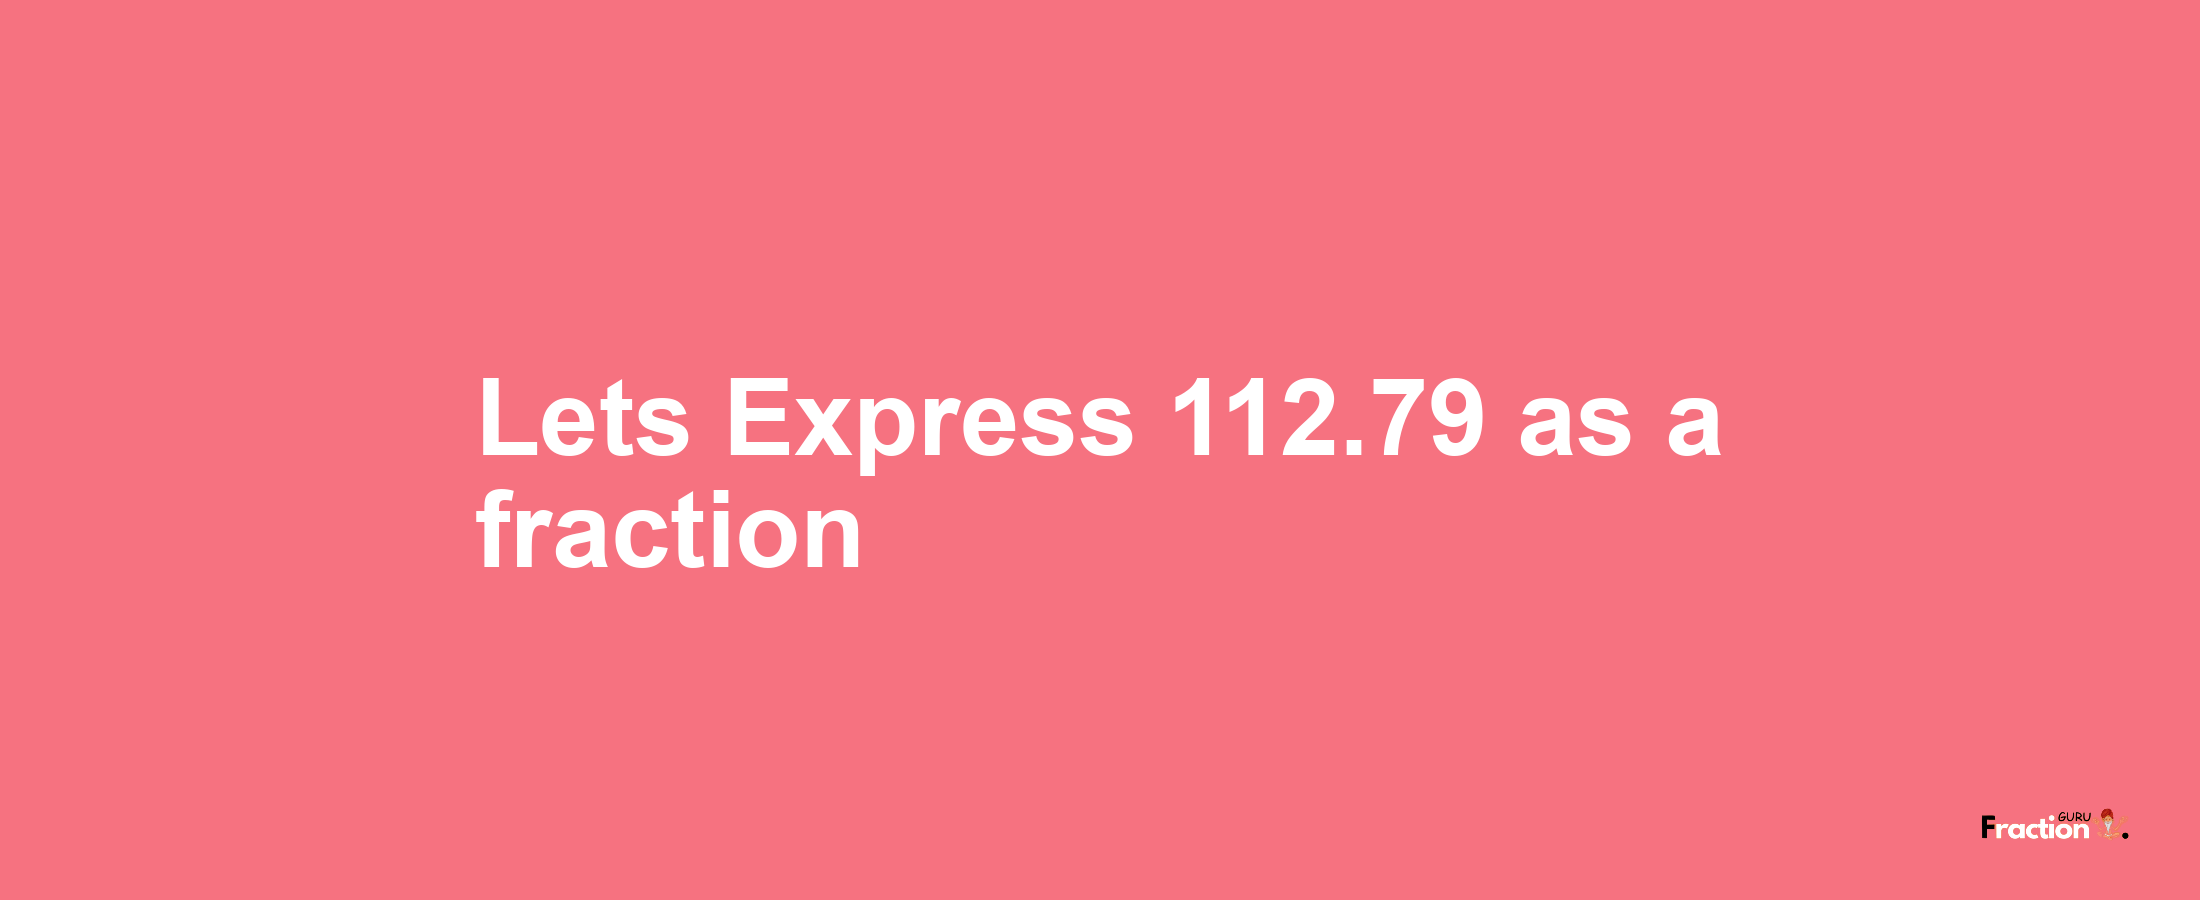 Lets Express 112.79 as afraction